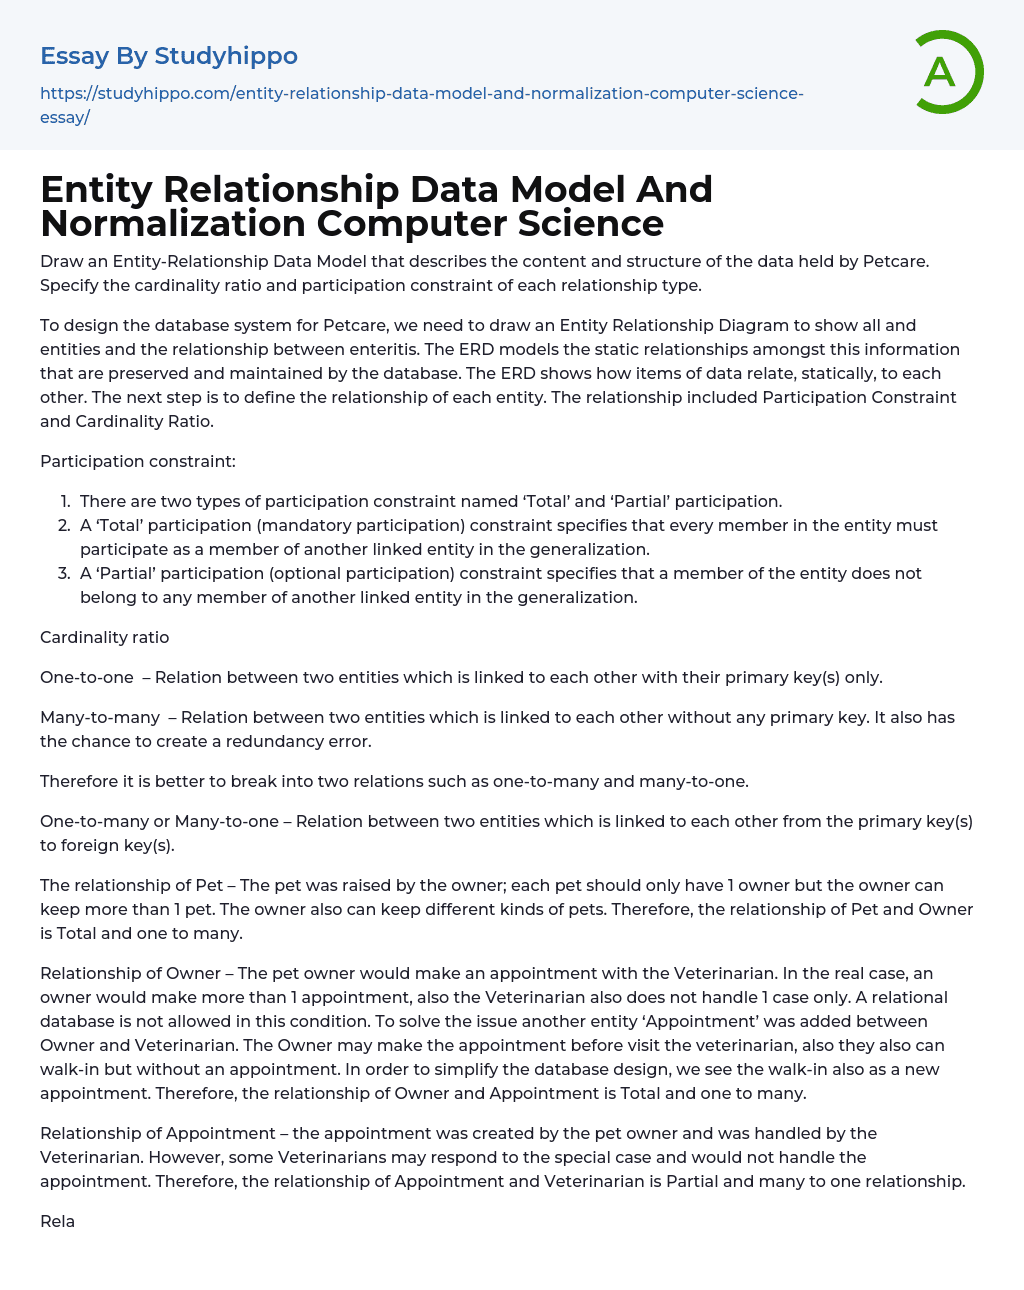 Entity Relationship Data Model And Normalization Computer Science Essay Example